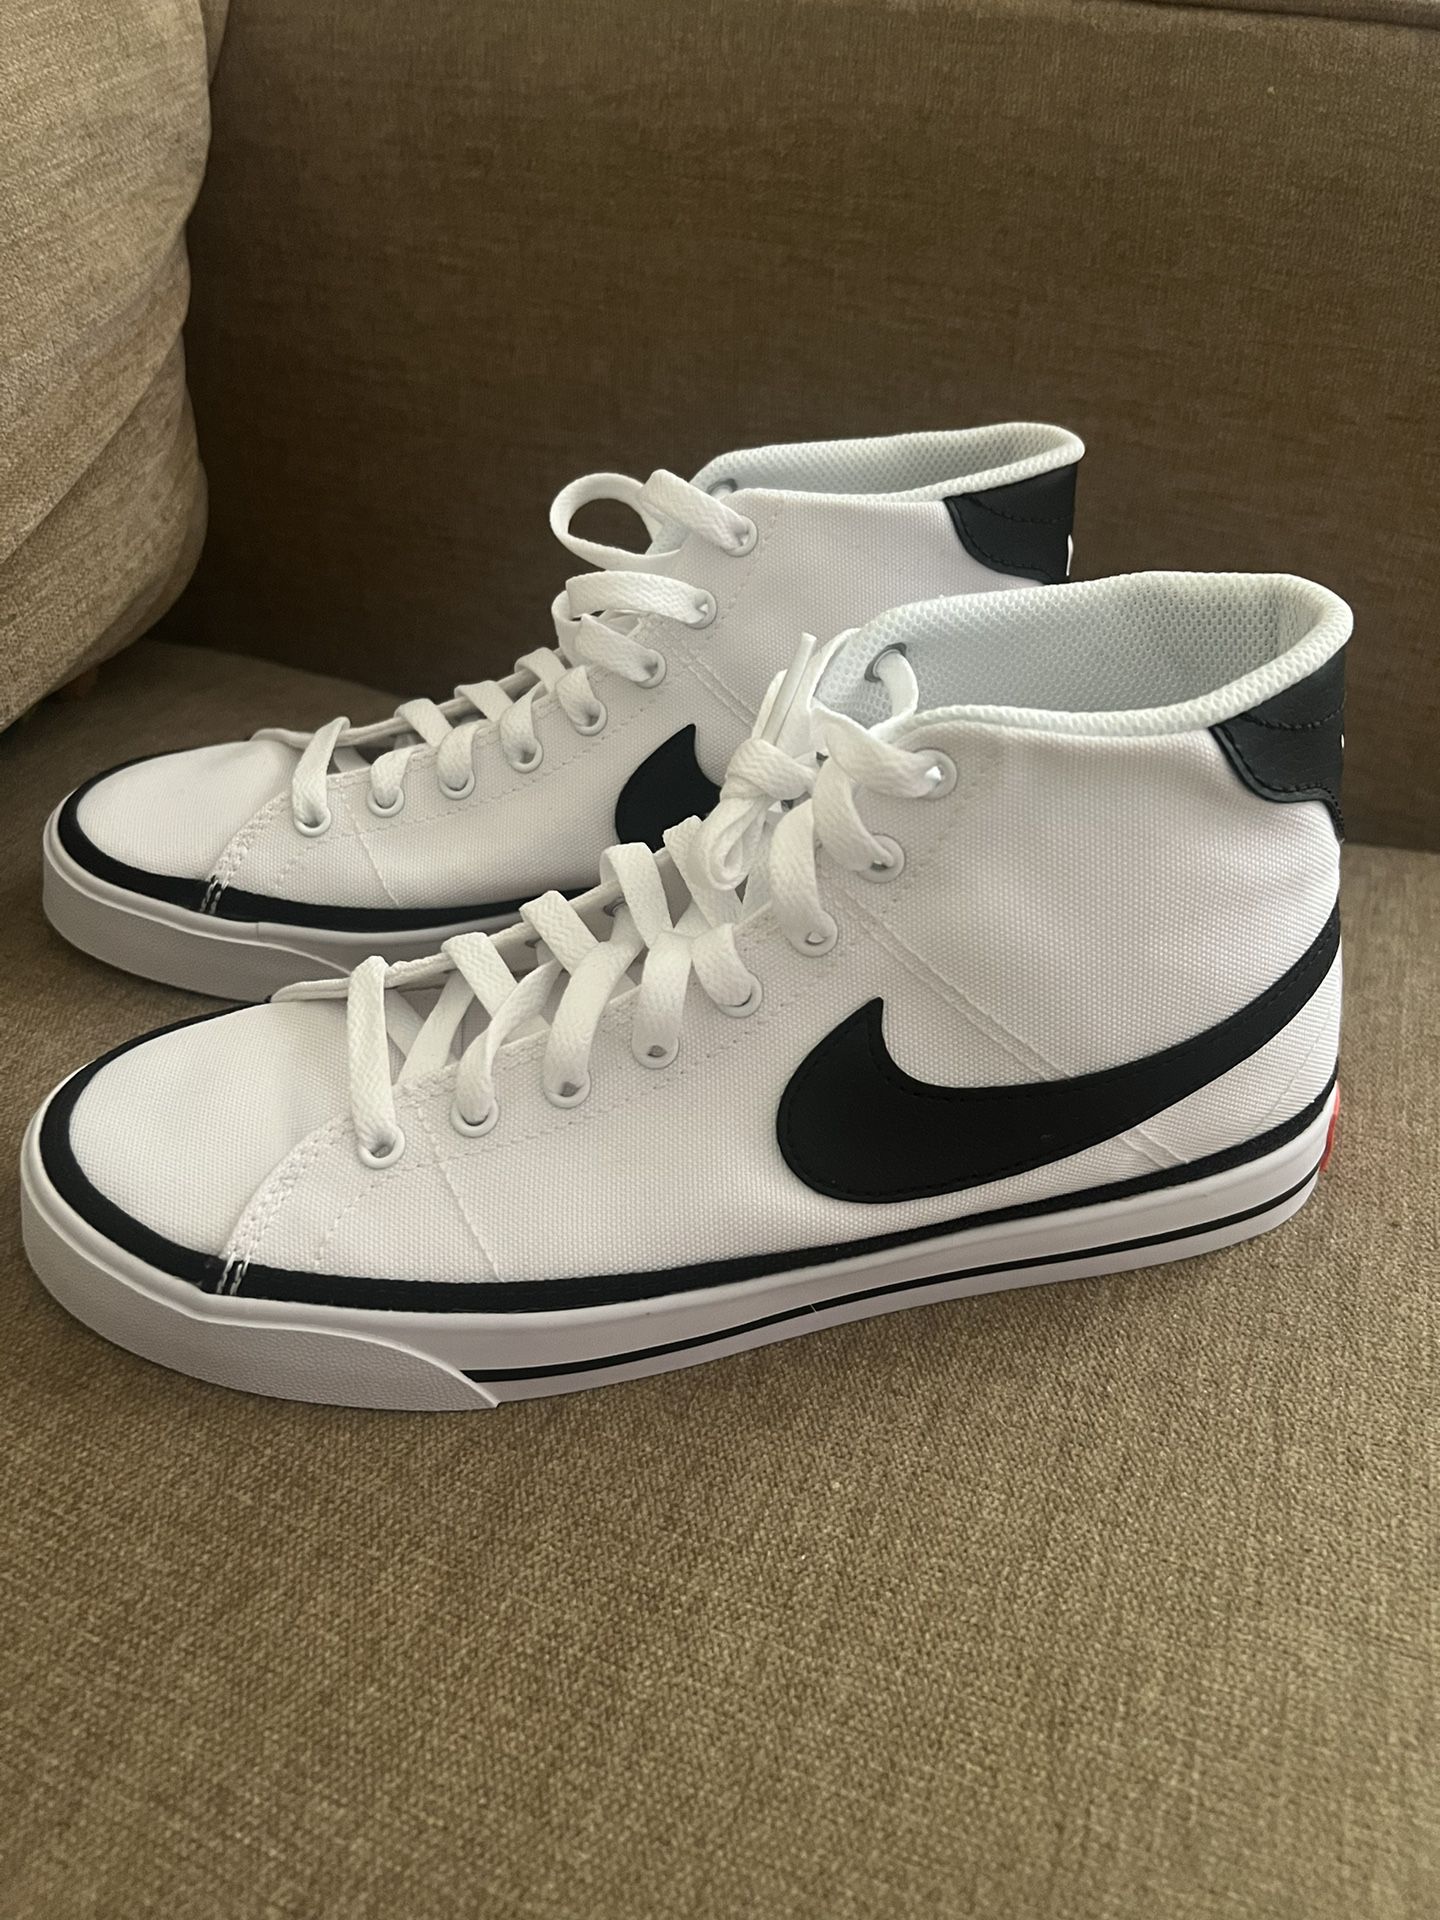 Brand New Nikes Shoes Size 9